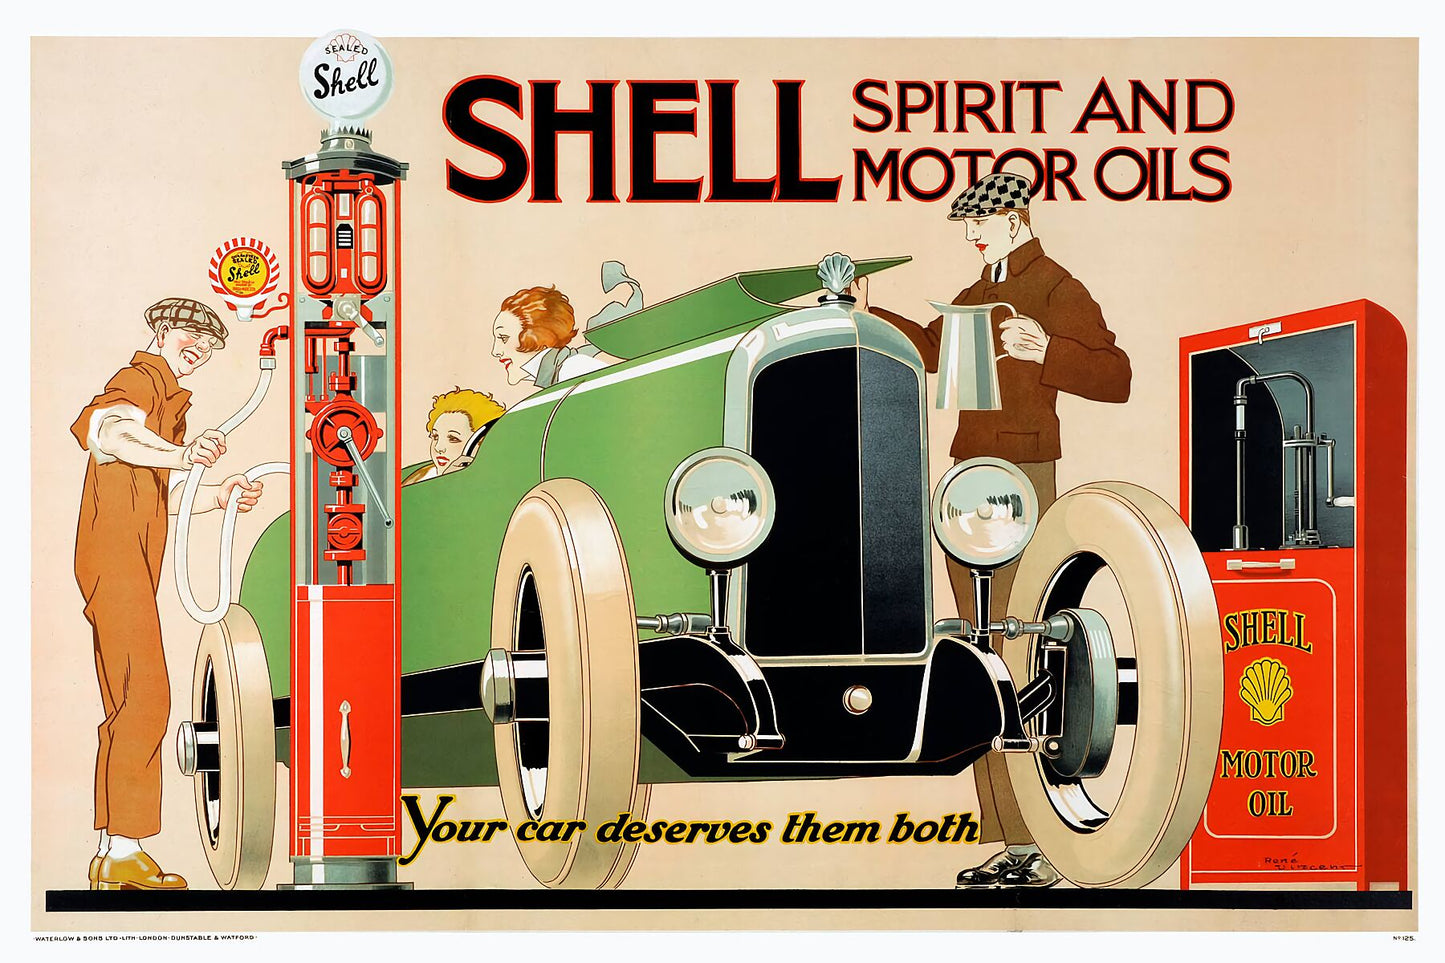 Shell Advert by Rene Vincent - 1926